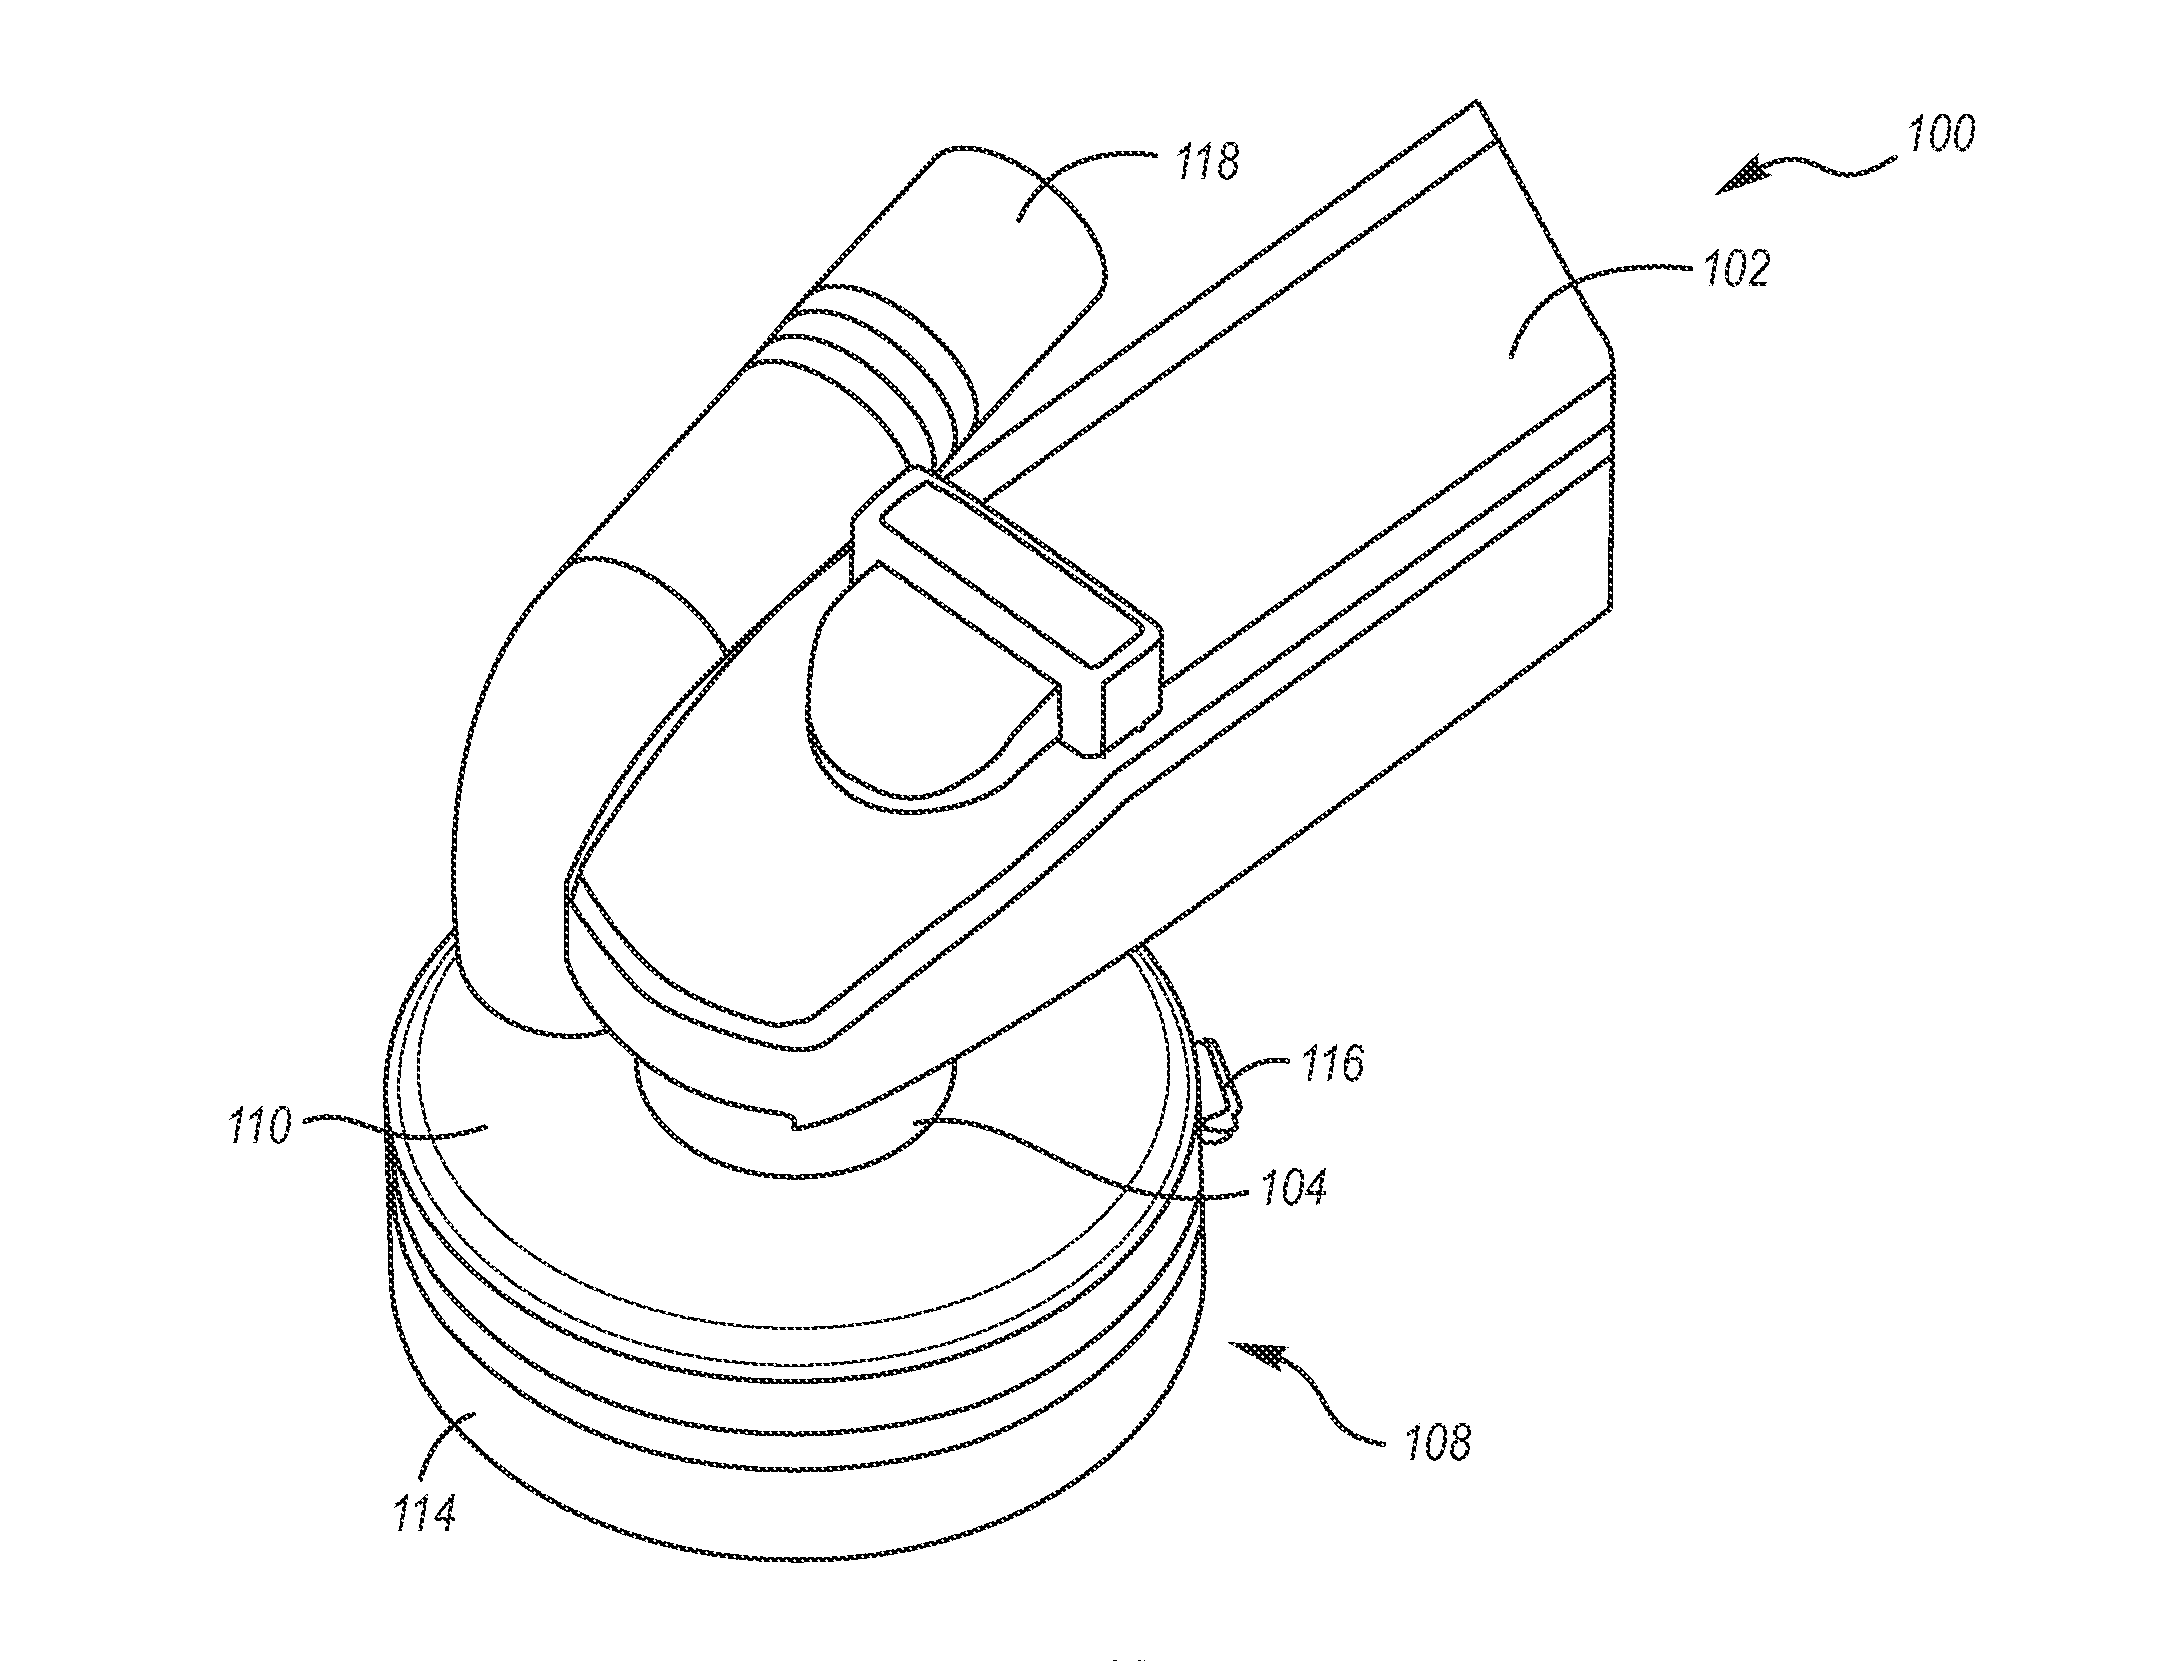 System and method for capturing dust created by rotary tool attachments